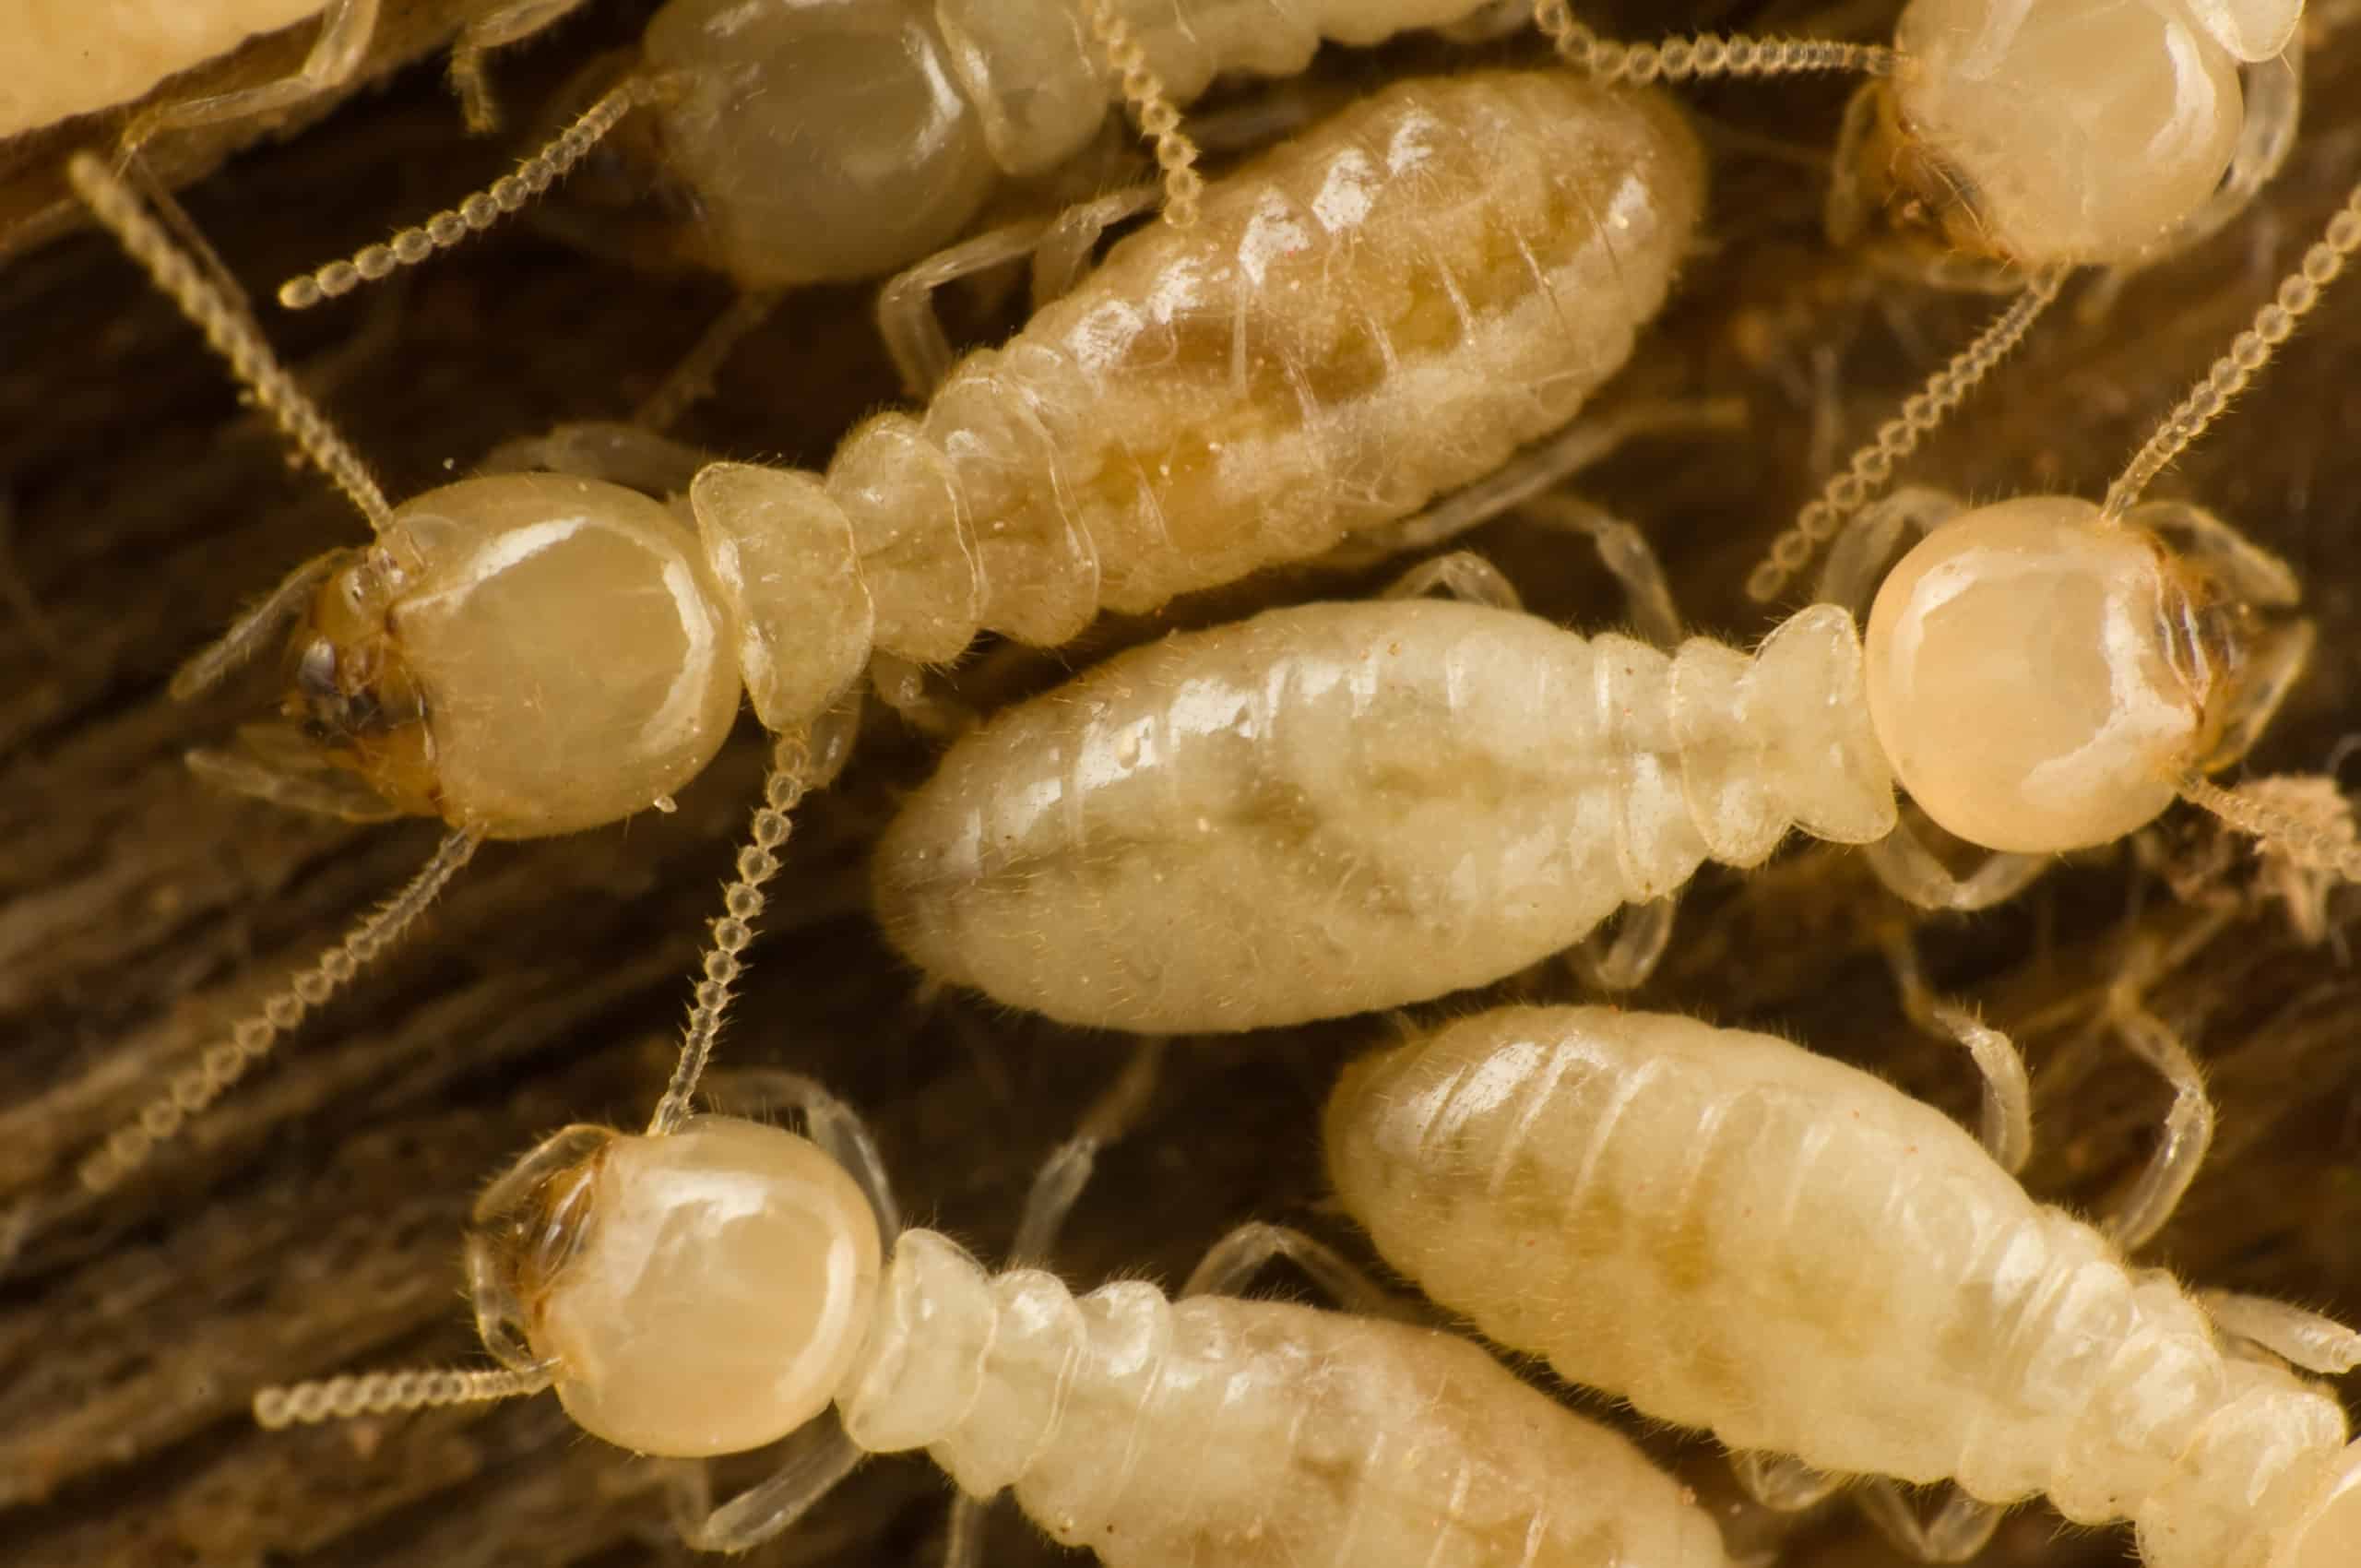 Signs Of Termite Infestation In Missouri